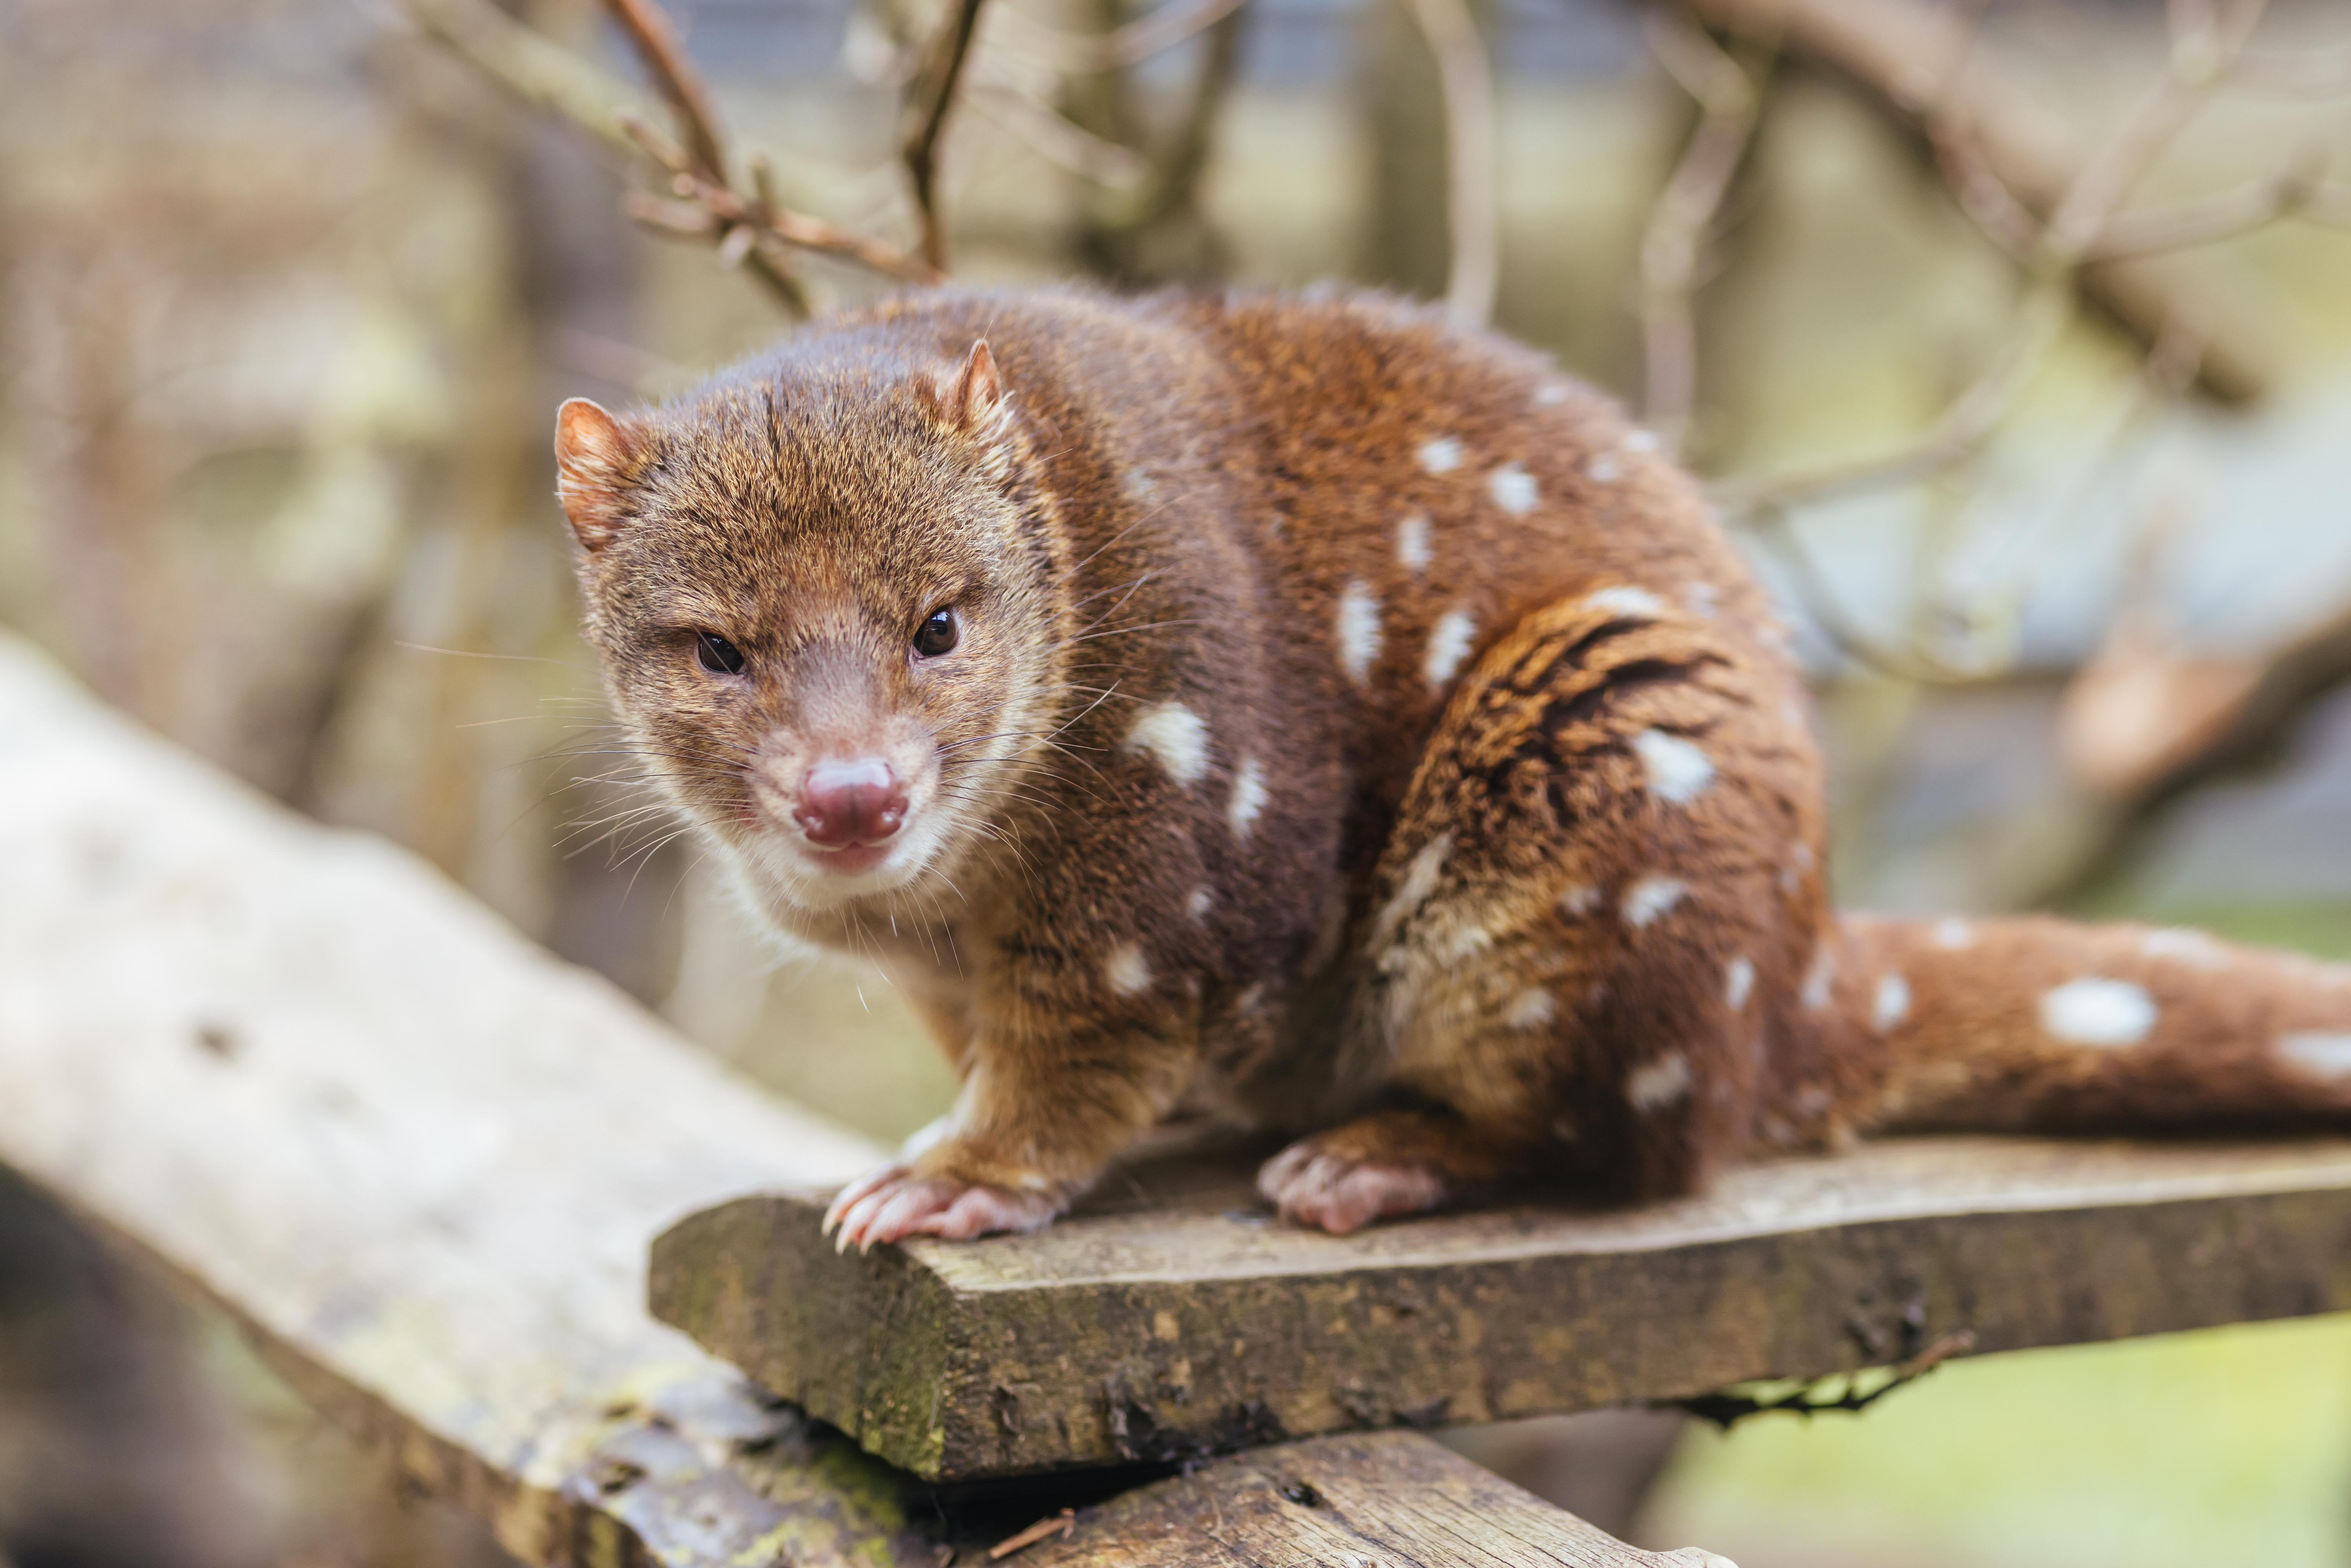 Quoll is on a wooden bench